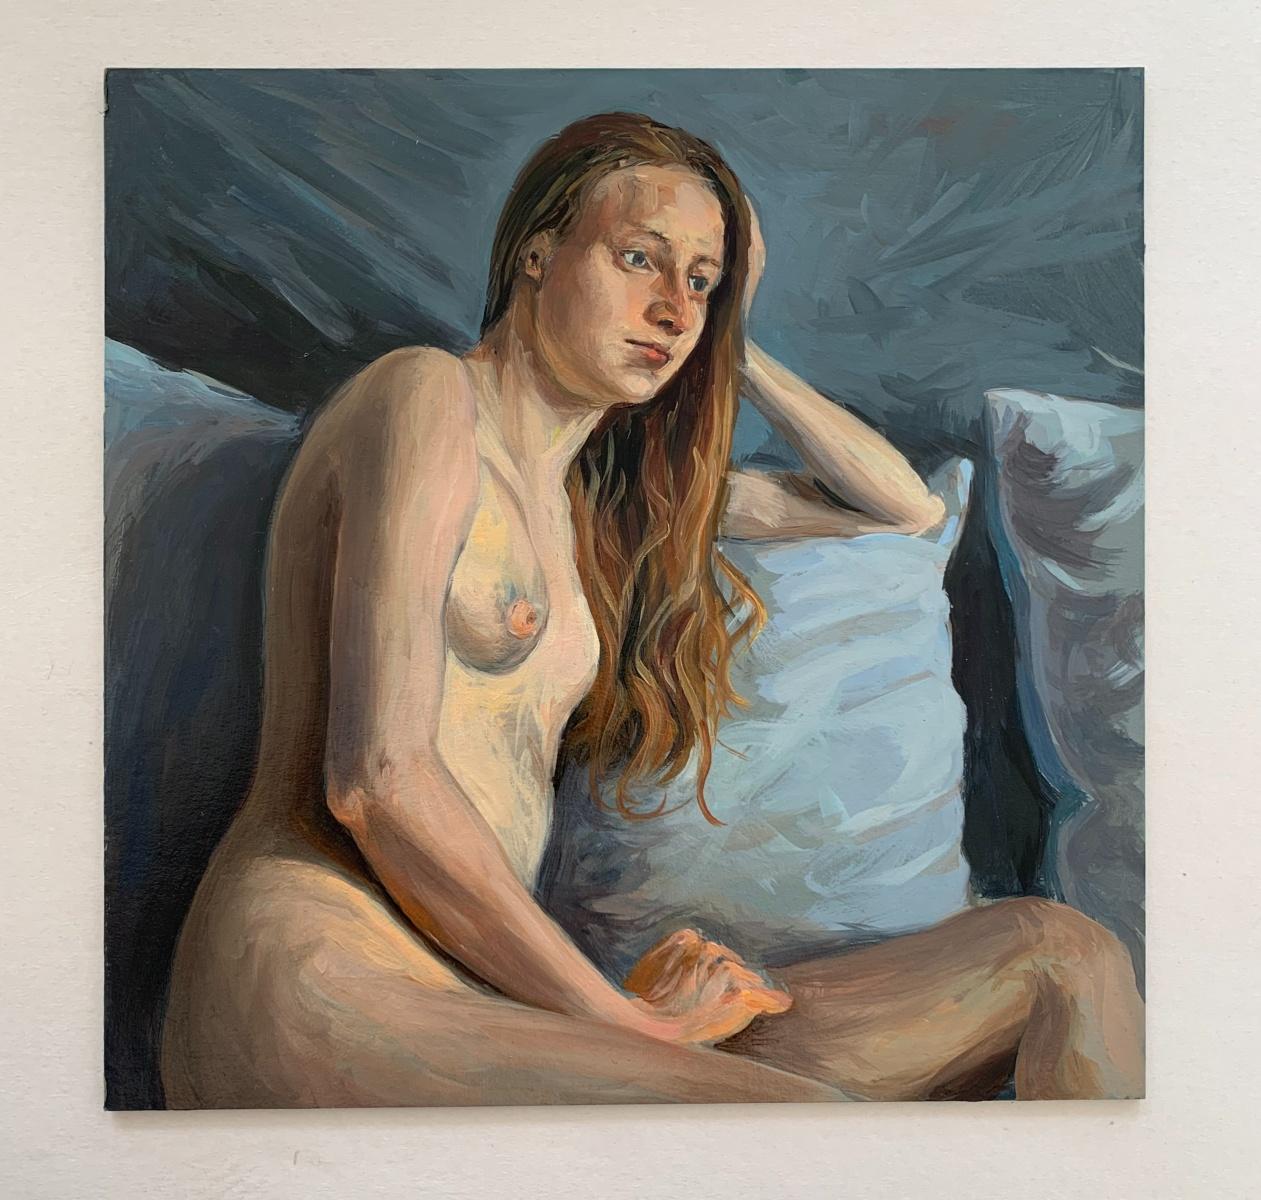 Nude with pillow - Realistic oil painting, Warm tones, Young Polish artist - Painting by Agnieszka Staak-Janczarska